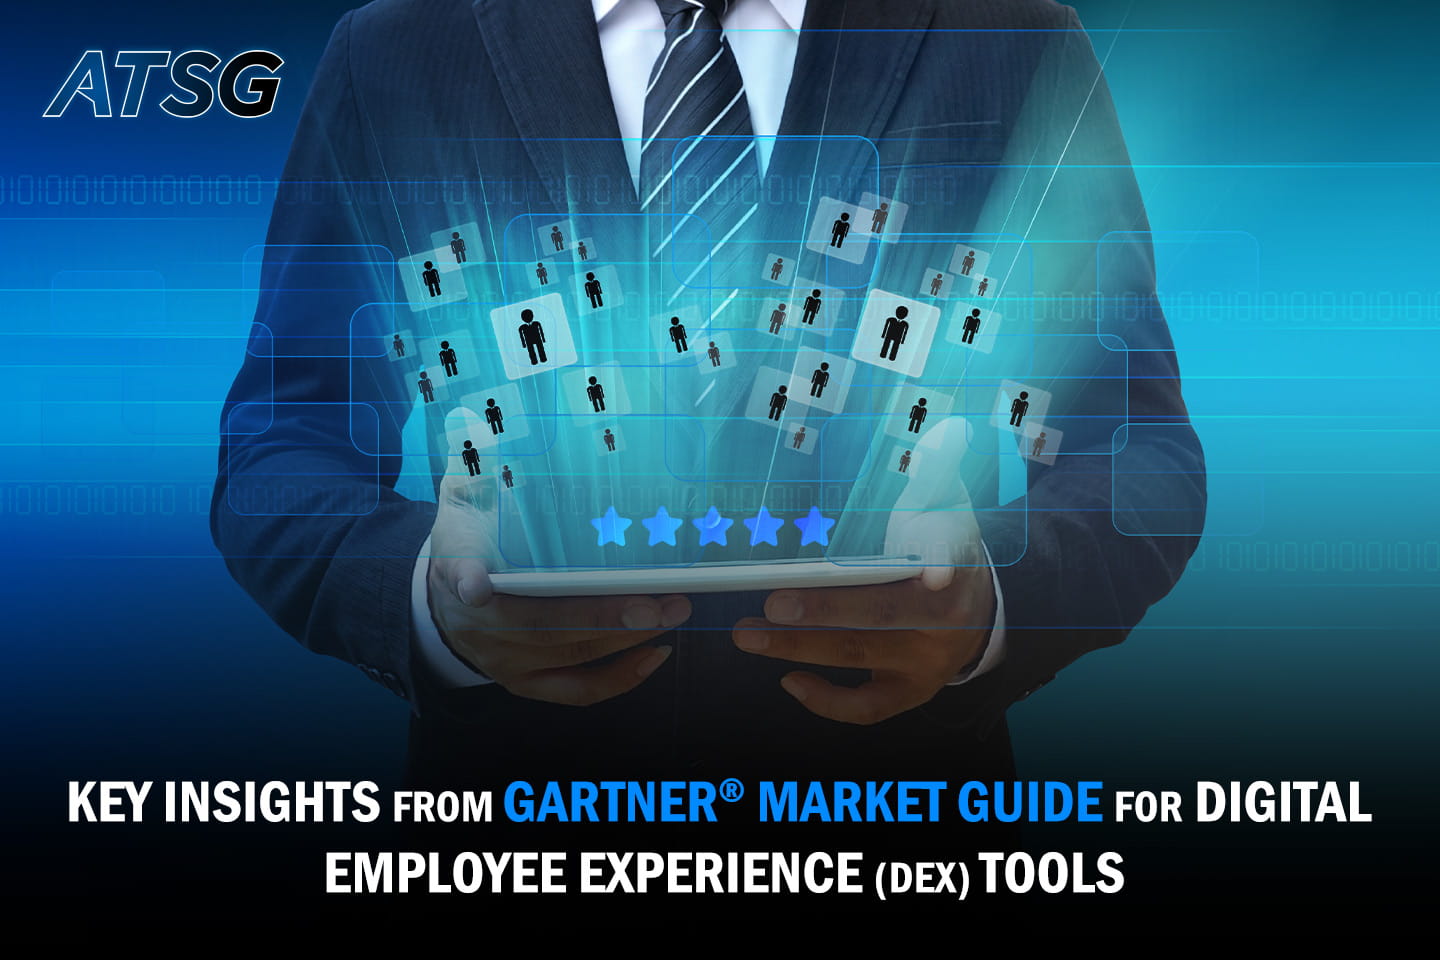 Key-Insights-from-Gartner-Market-Guide-for-Digital-Employee-Experience-Tools-Featured